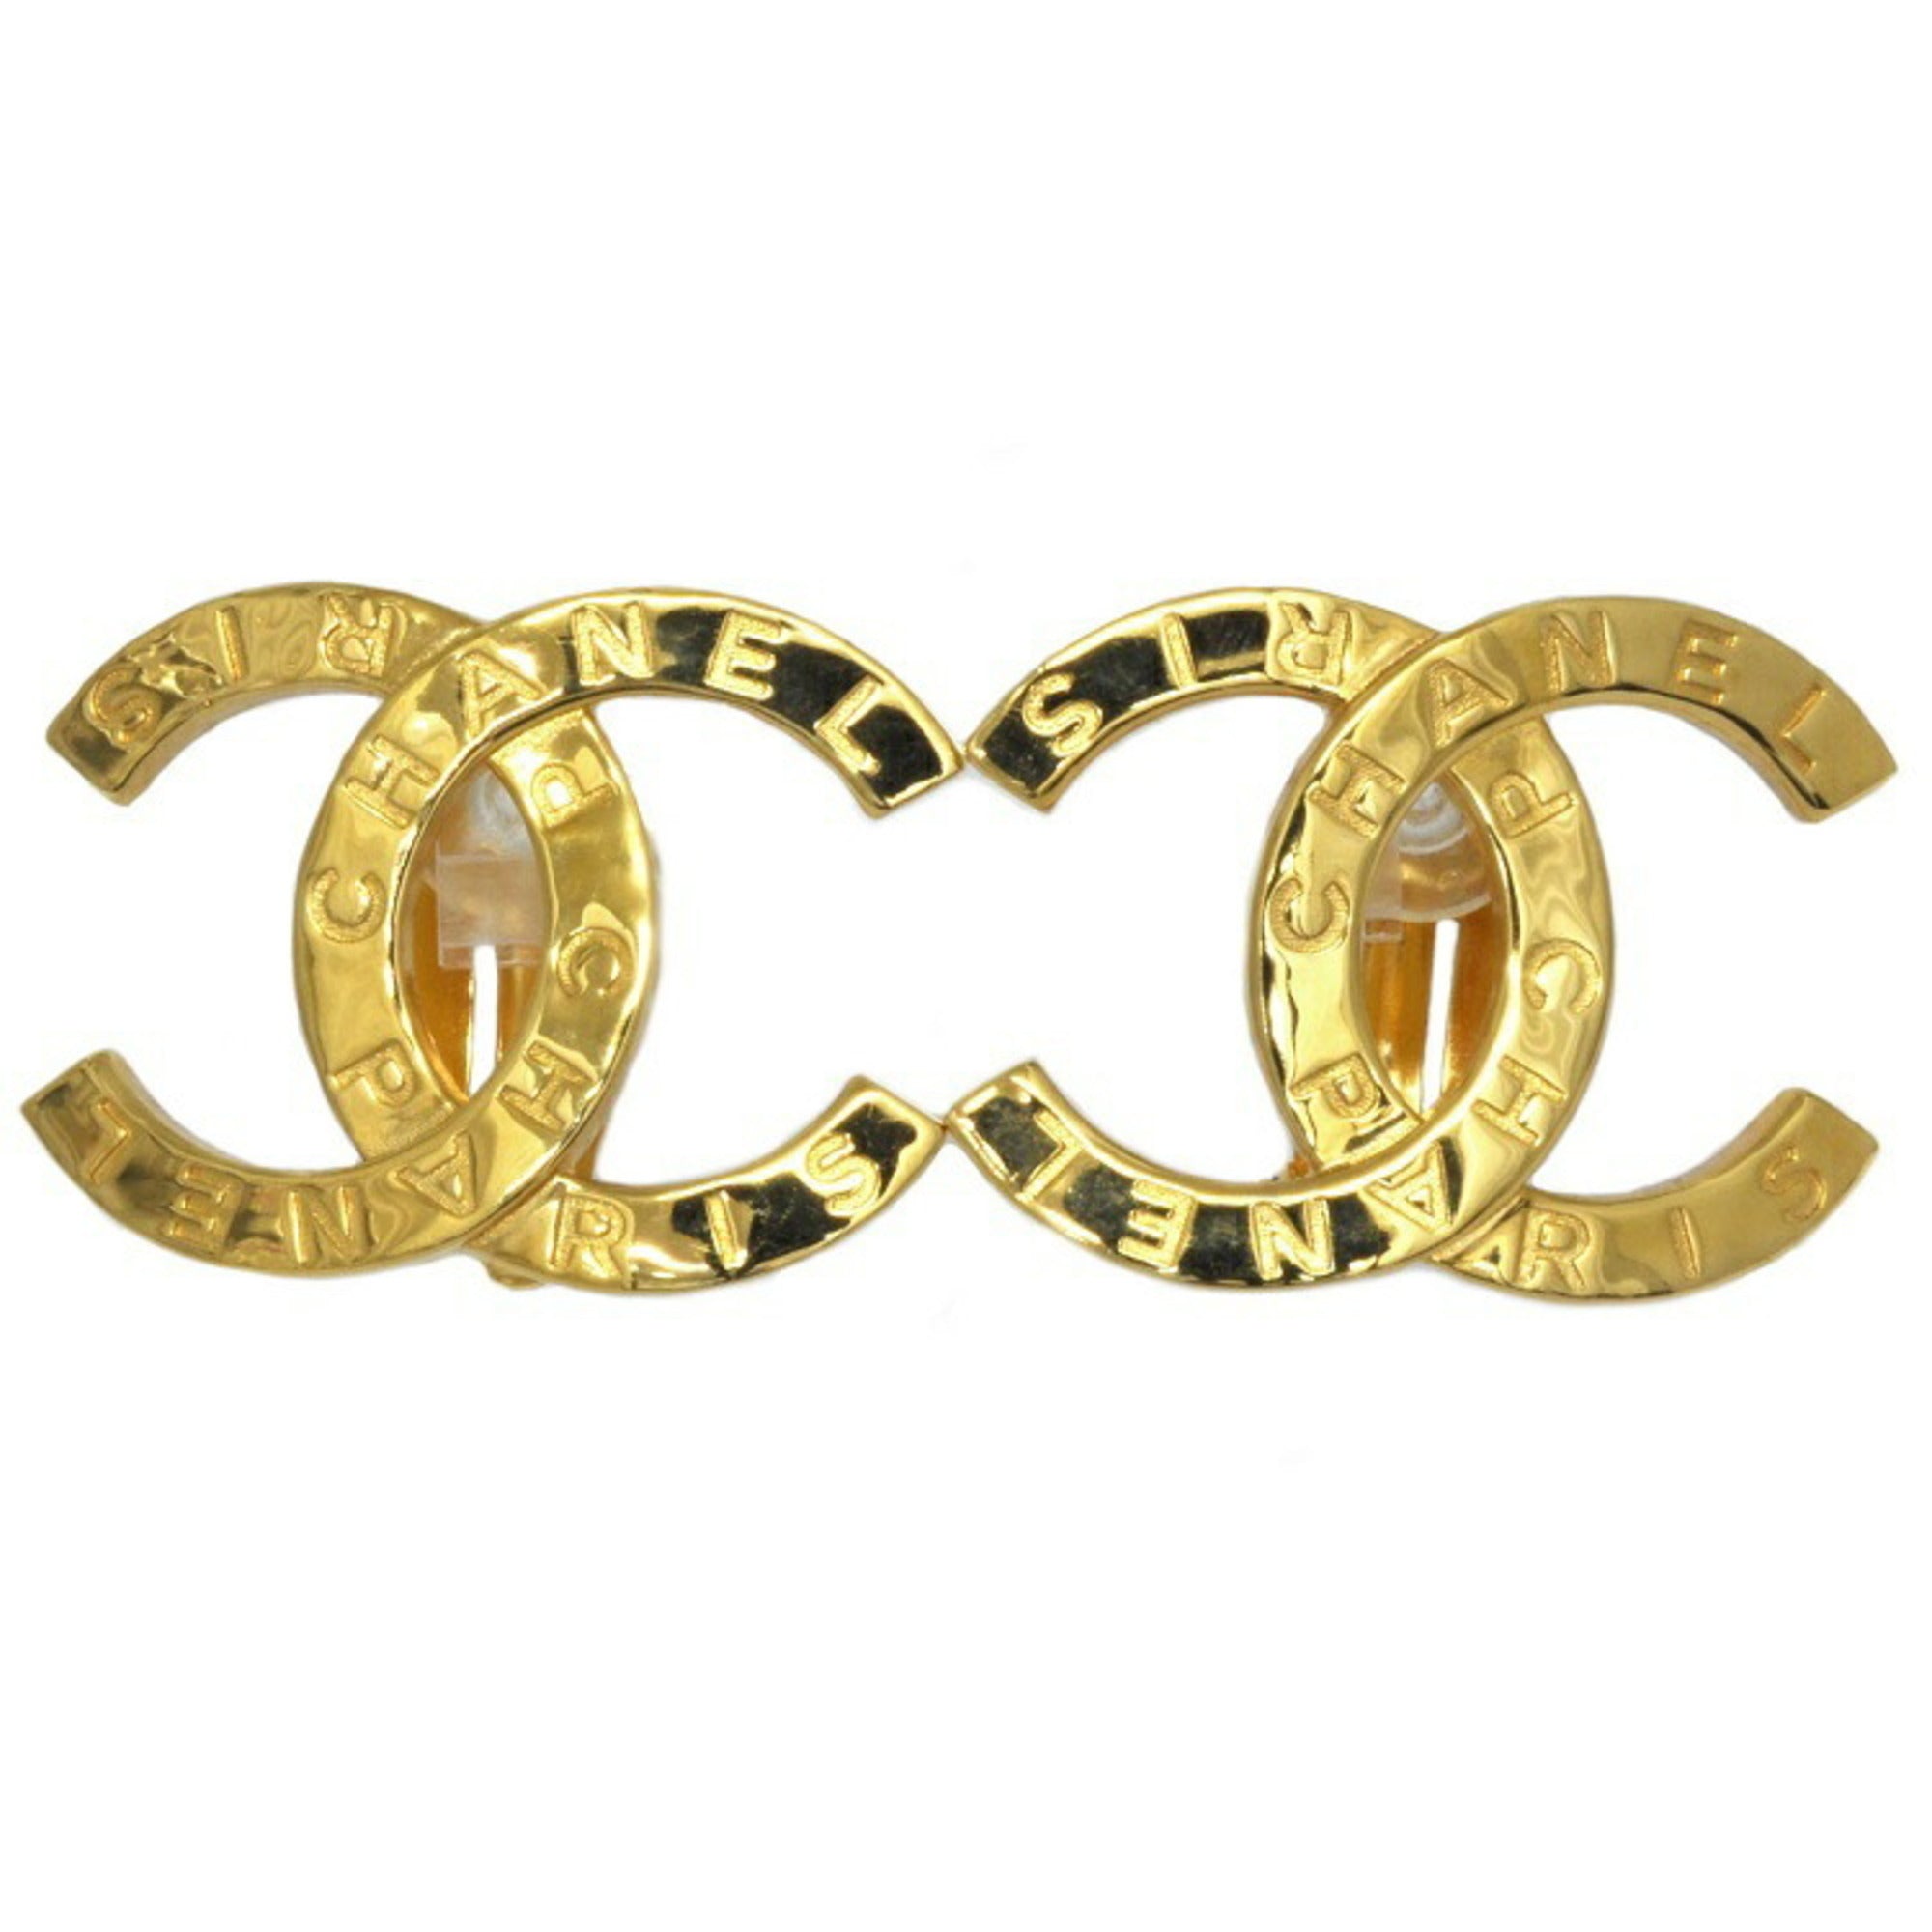 CHANEL Rhinestone Fashion Jewelry for Sale, Shop New & Pre-Owned Jewelry